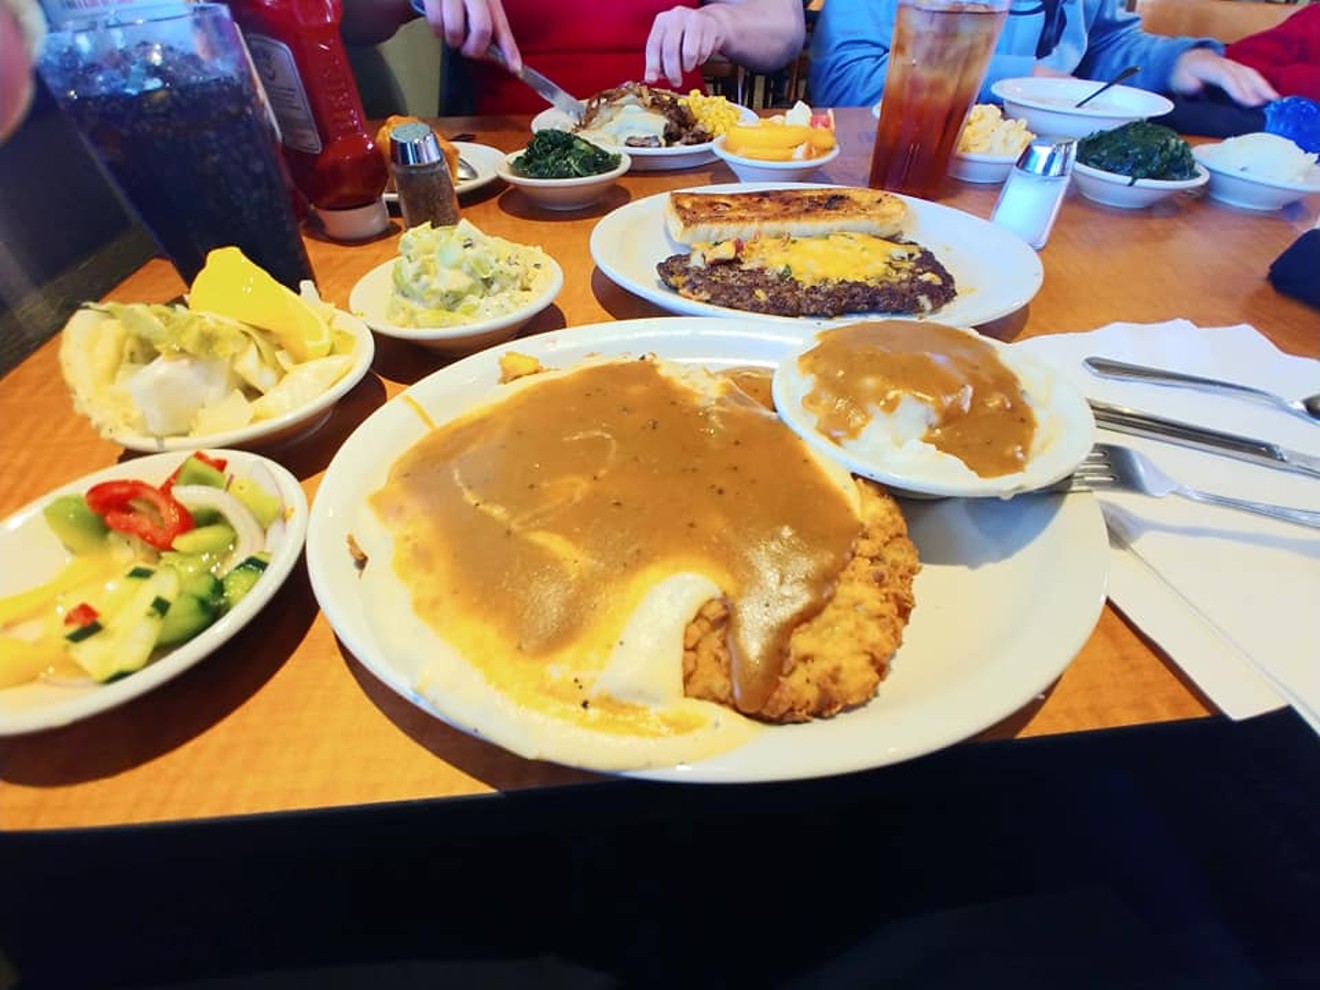 The chicken fried steak is one of the most popular dishes at Luby's.